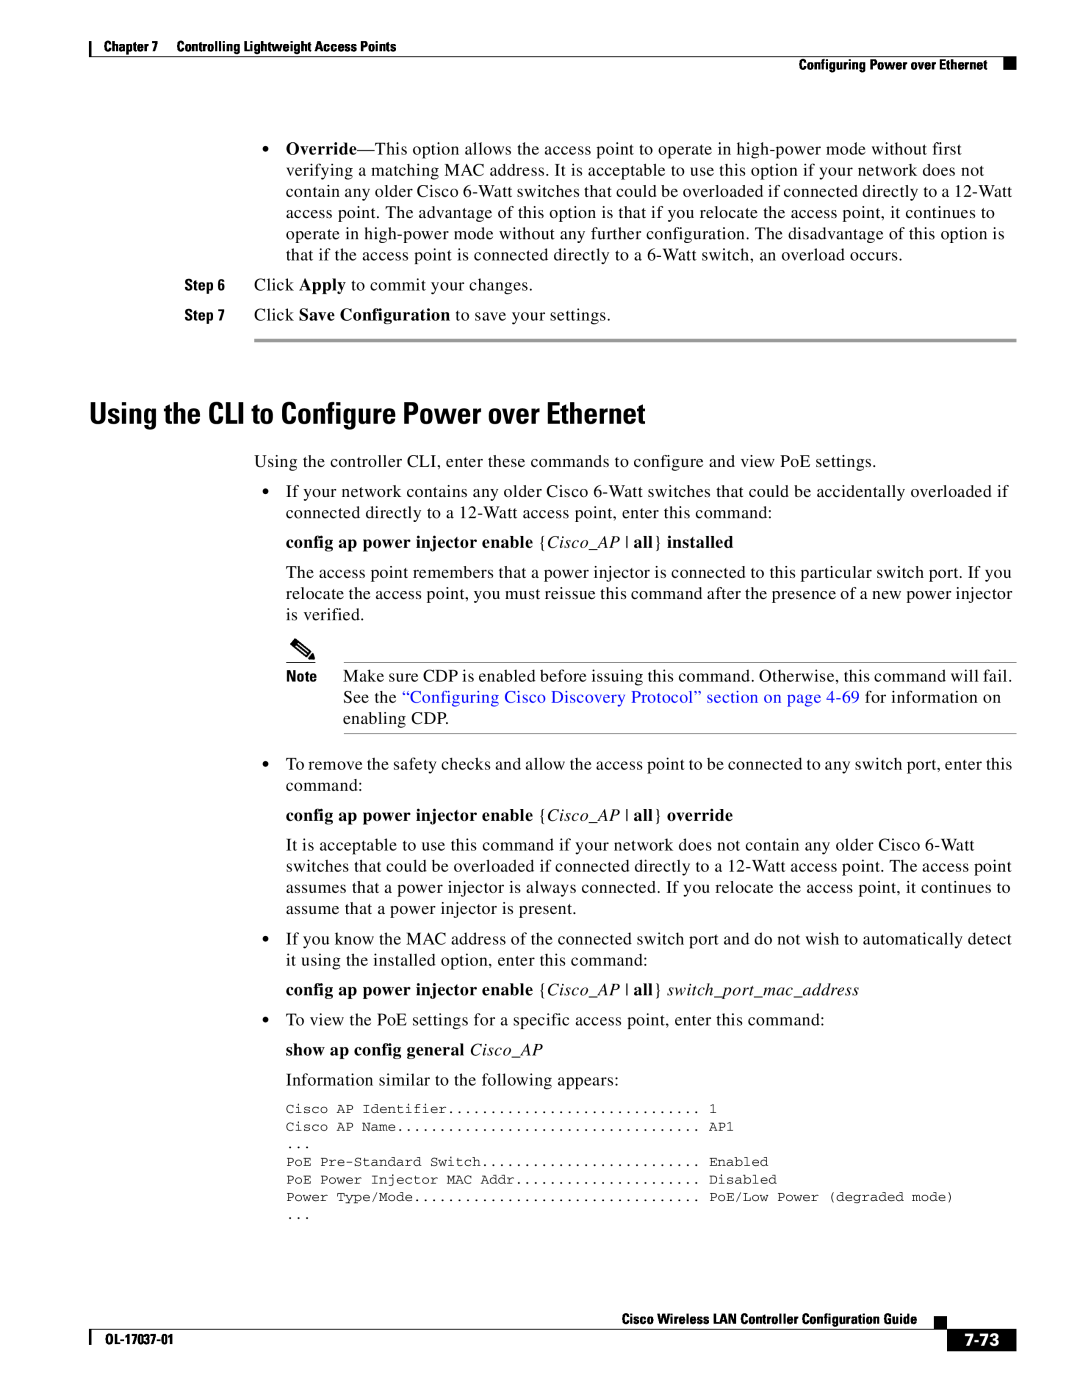 Cisco Systems OL-17037-01 manual Using the CLI to Configure Power over Ethernet, 7-73 